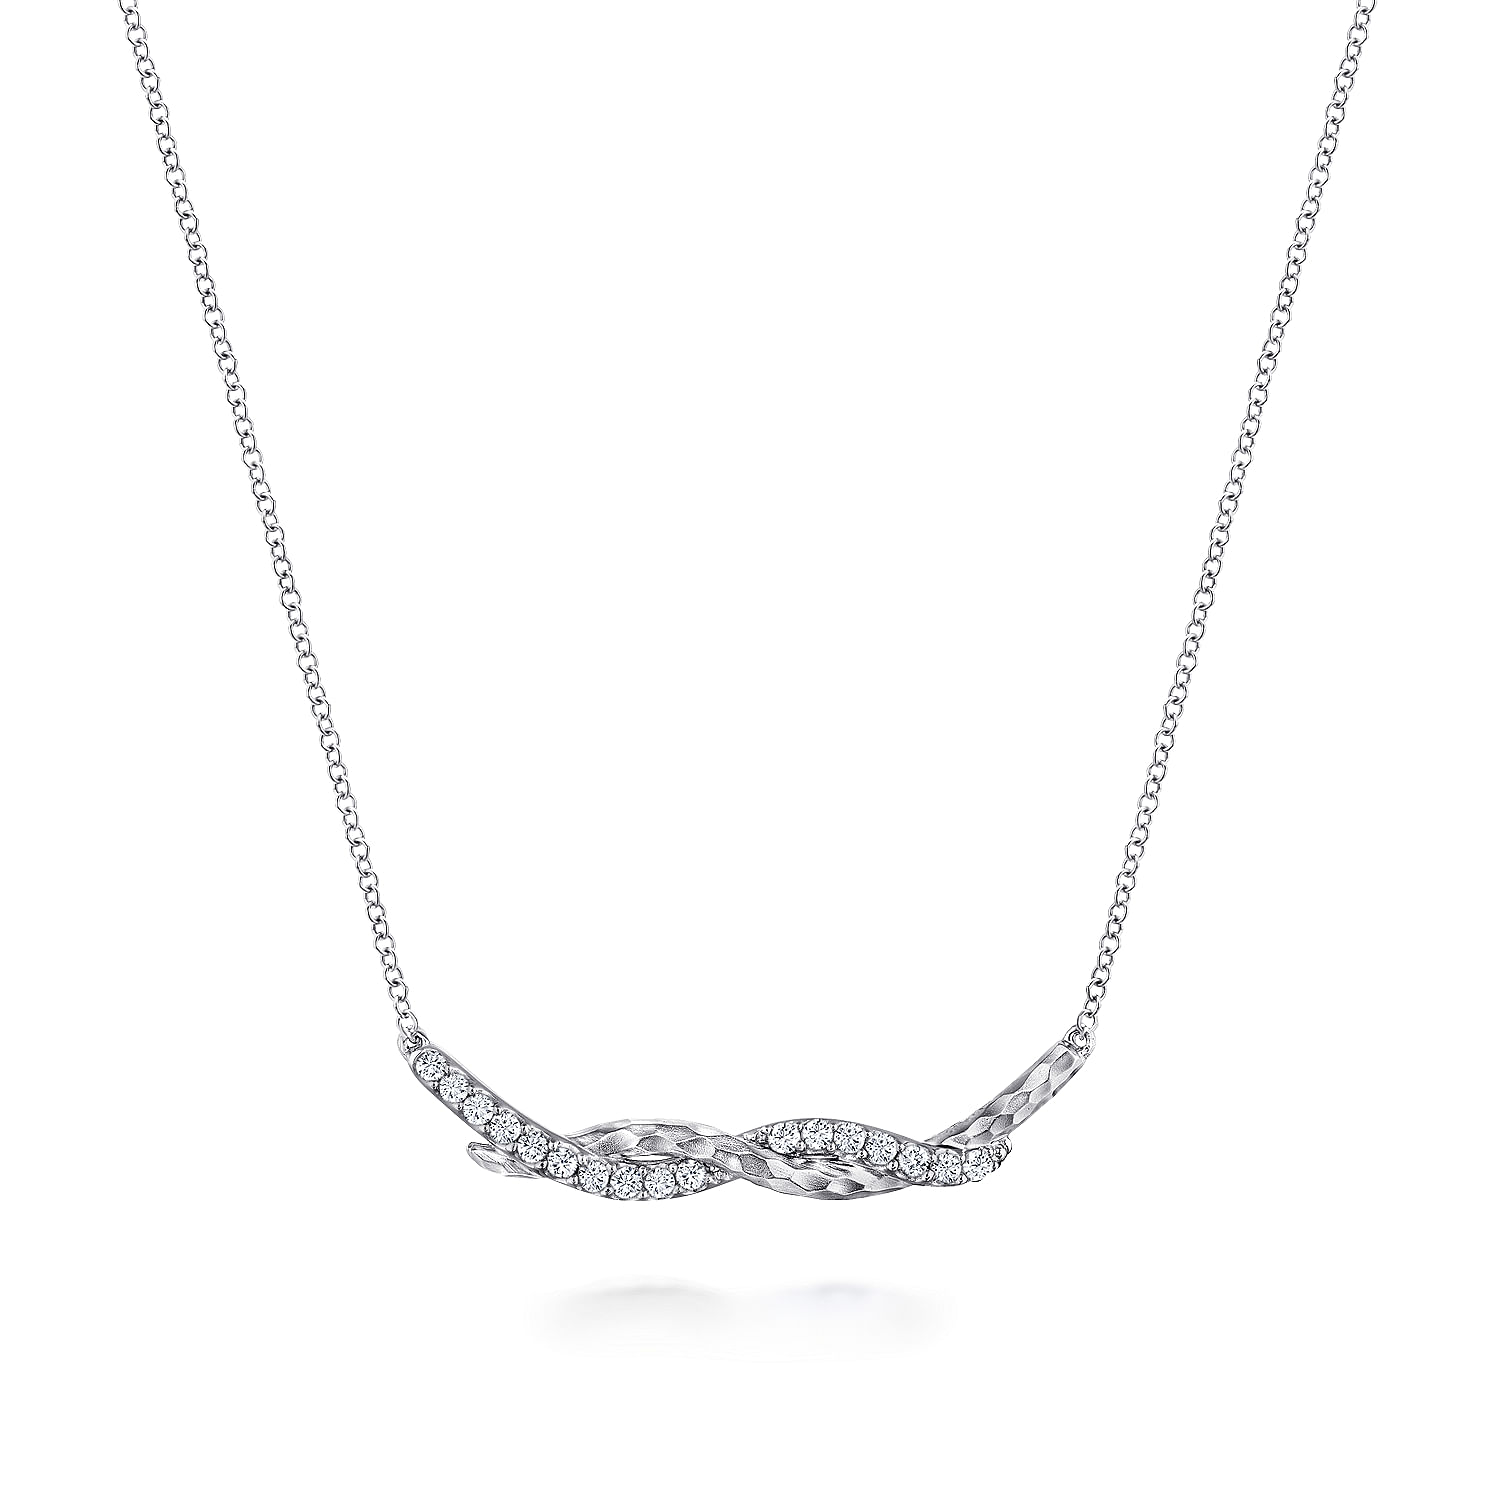 Hammered 925 Sterling Silver White Sapphire Twisted Bar Necklace